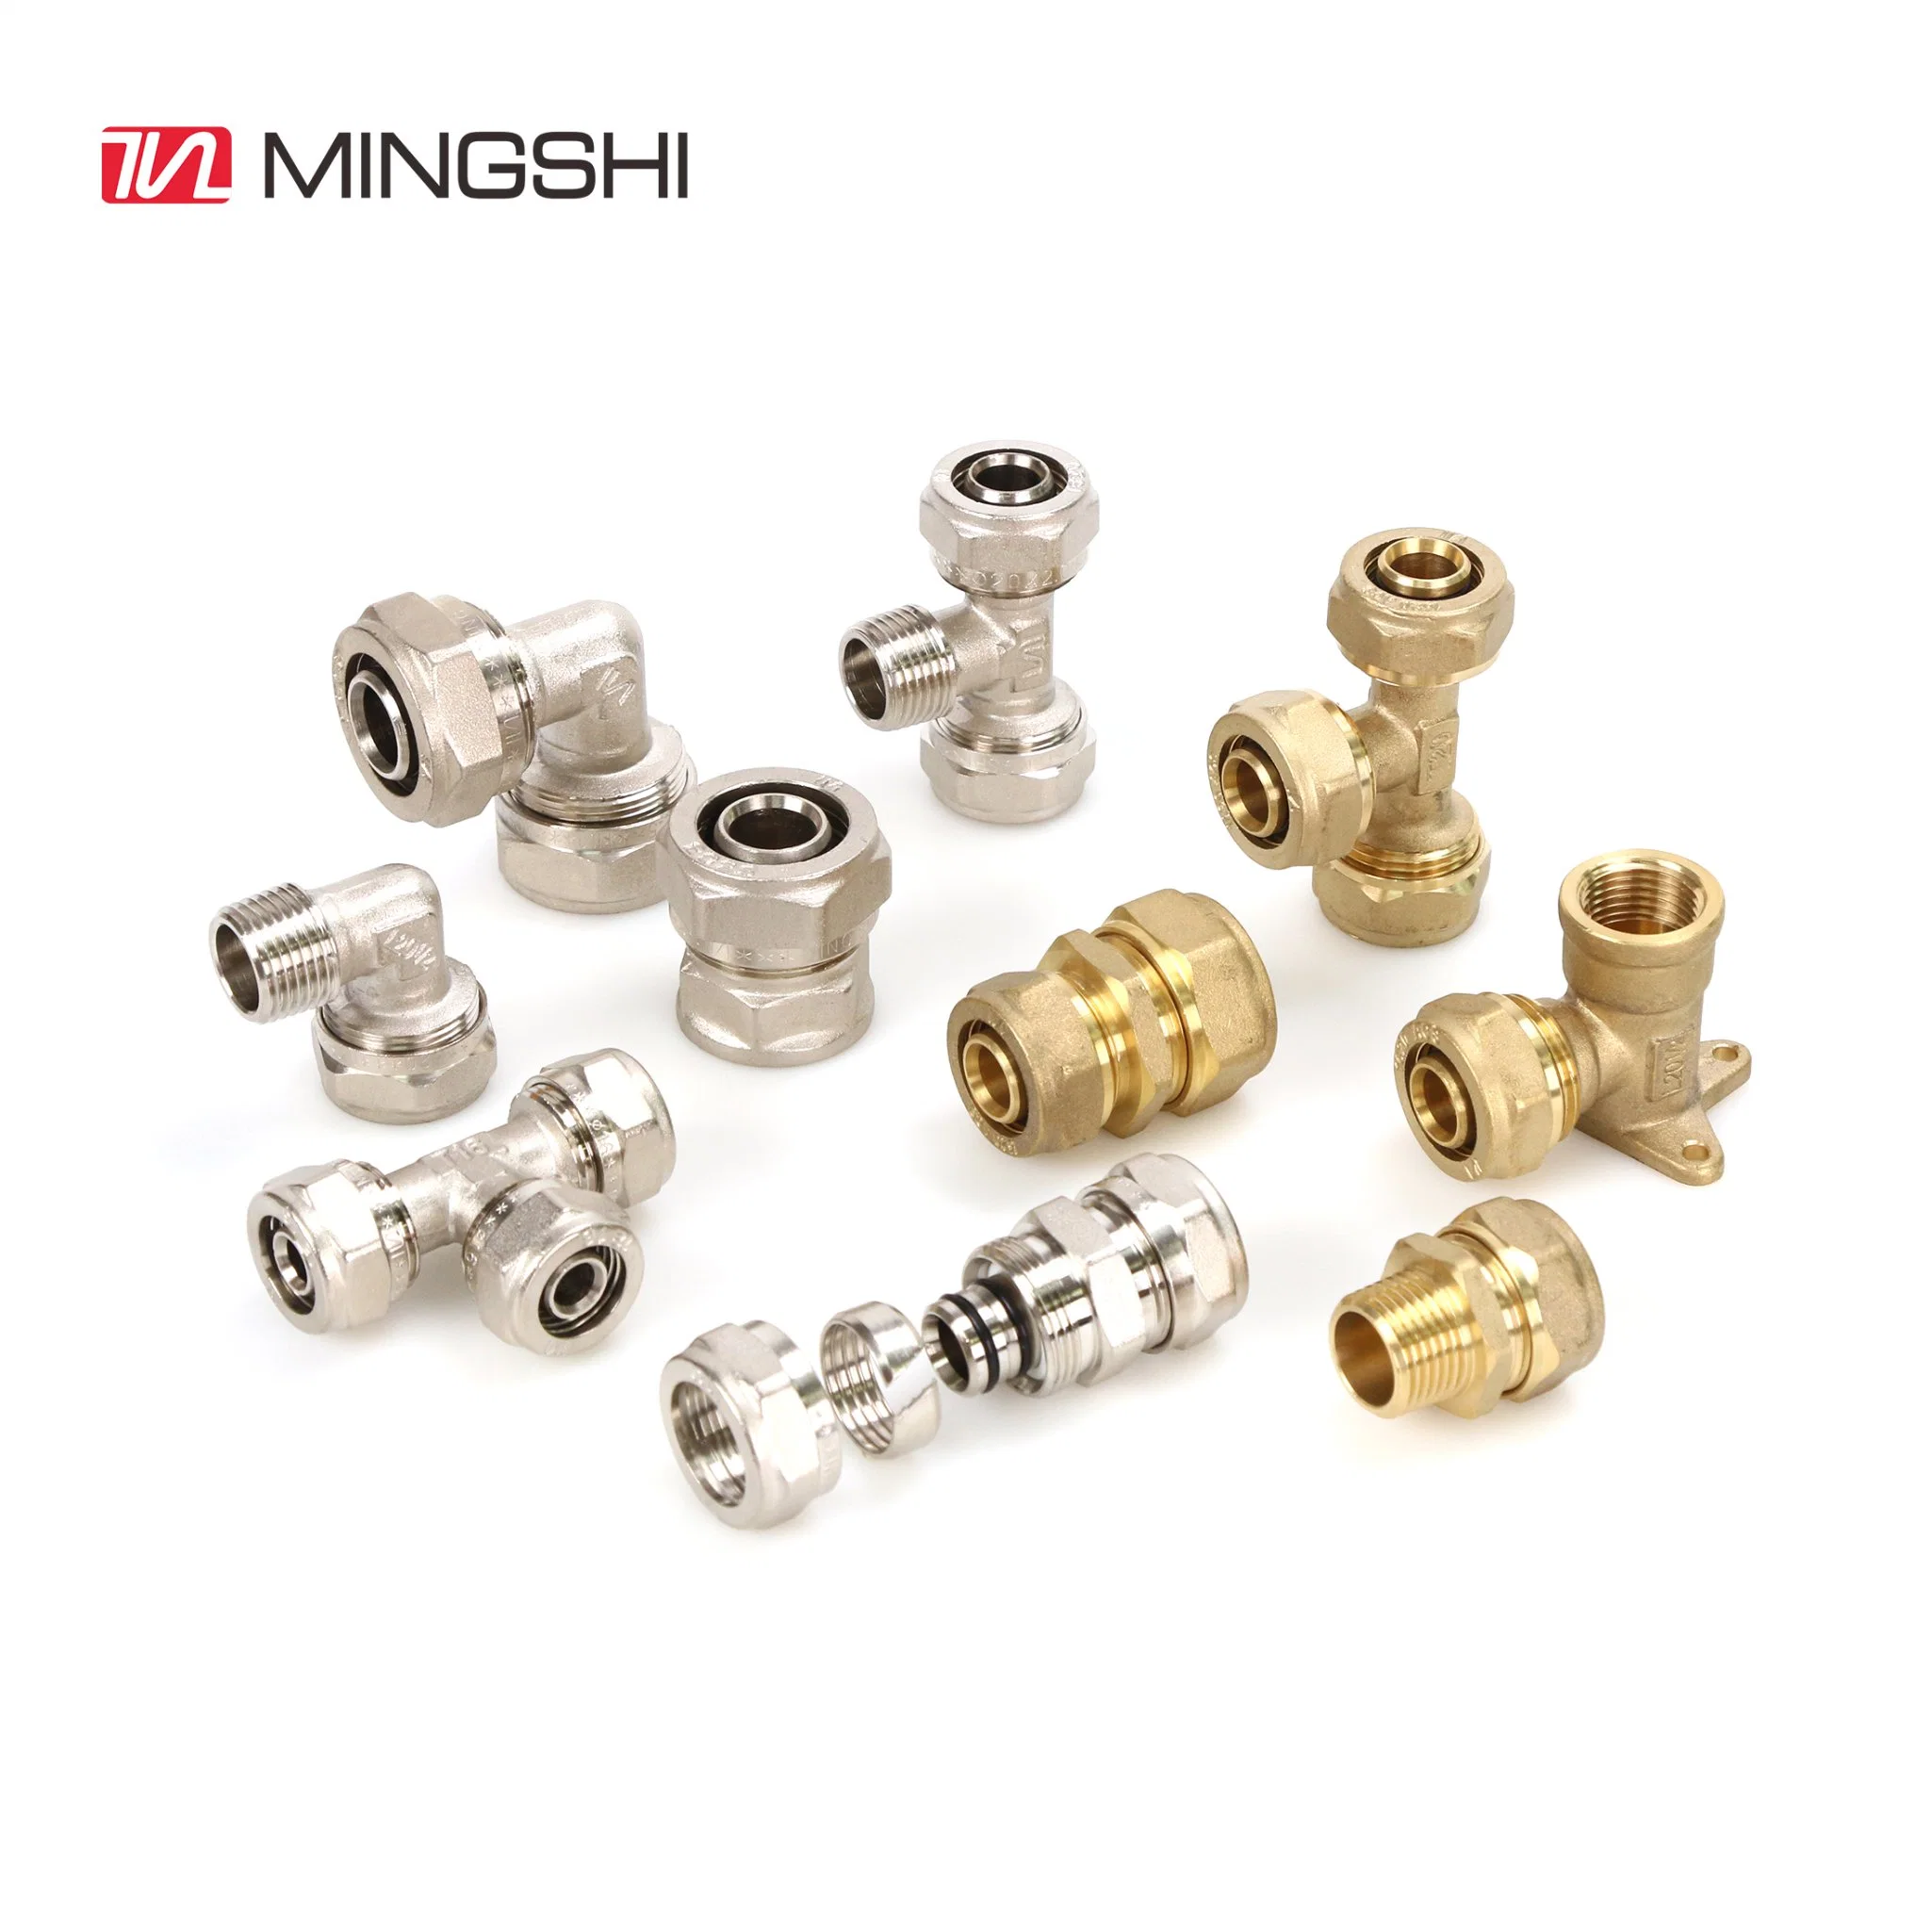 Plumbing Nickel Plated Brass Compression Fitting for Multilayer Pex-Al-Pex Water and Gas Pipe-Reduce Tee